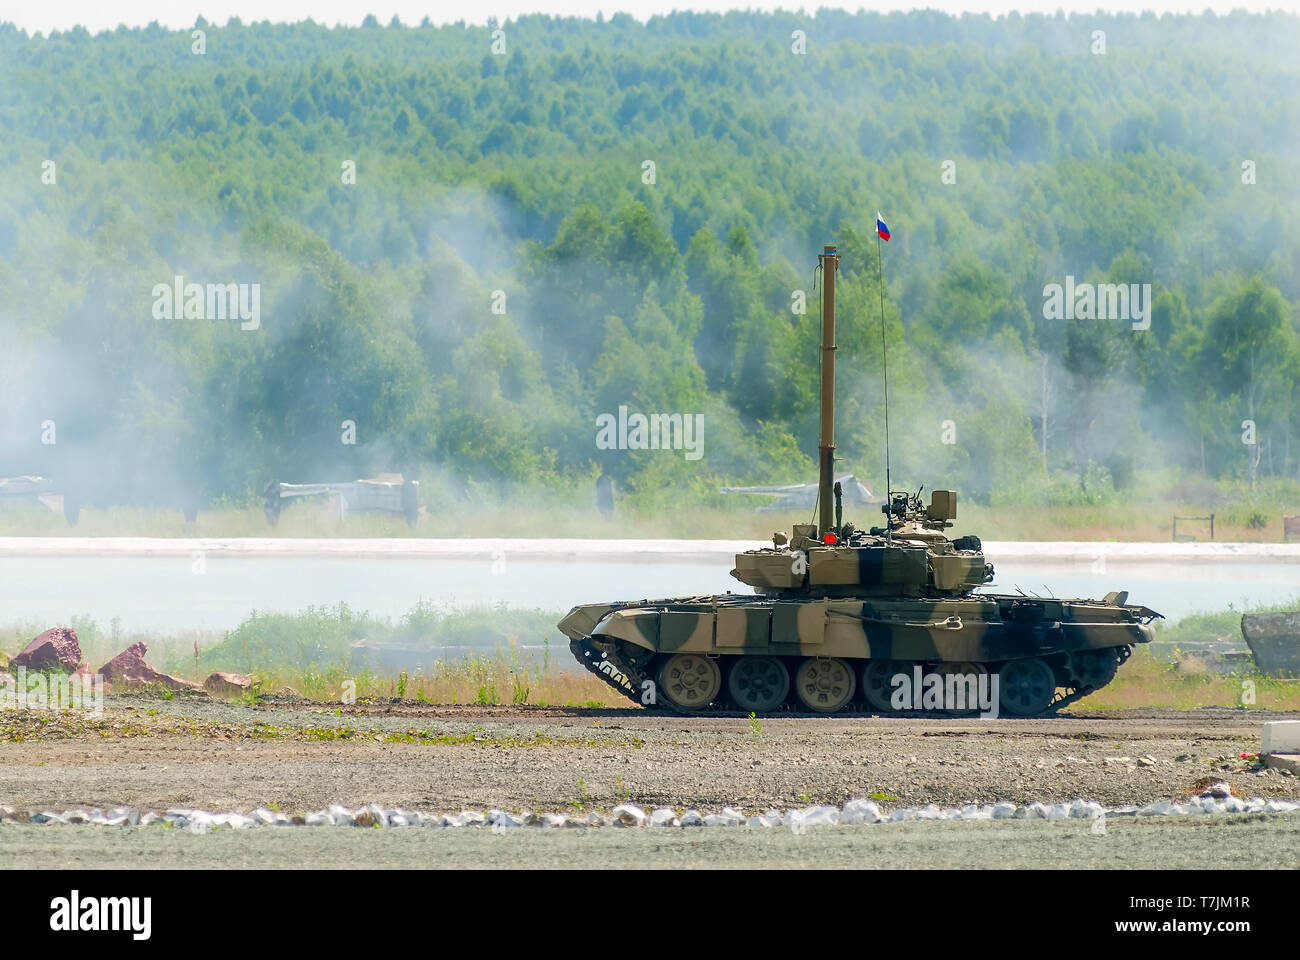 Nizhniy Tagil, Russia - July 12. 2008: T80 tank with equipment for speeding up of water crossing. Russia Arms Expo exhibition Stock Photo